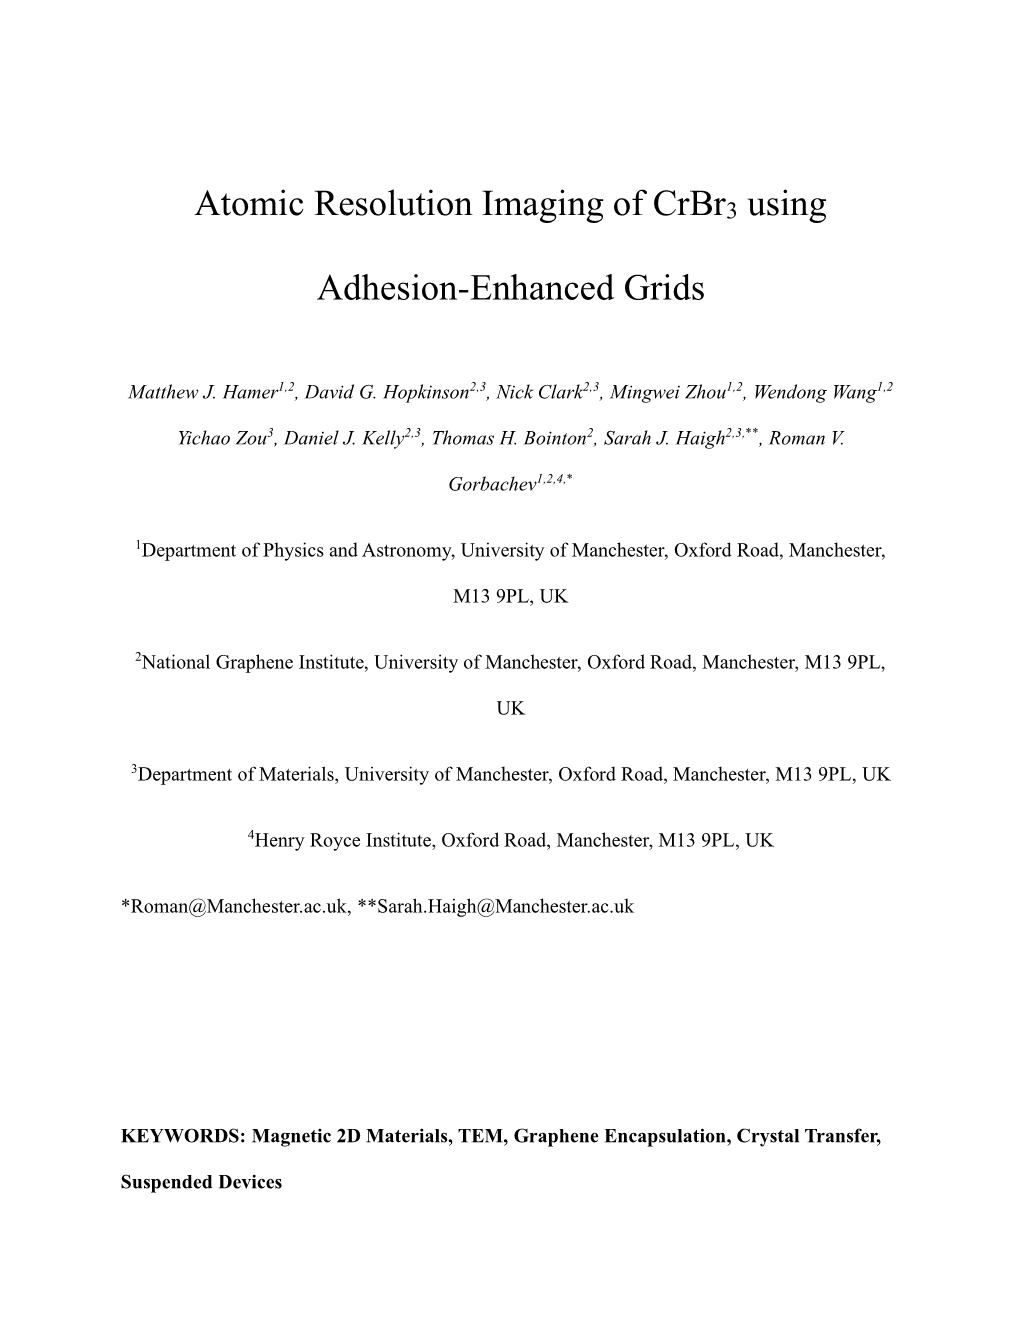 Atomic Resolution Imaging of Crbr3 Using Adhesion-Enhanced Grids